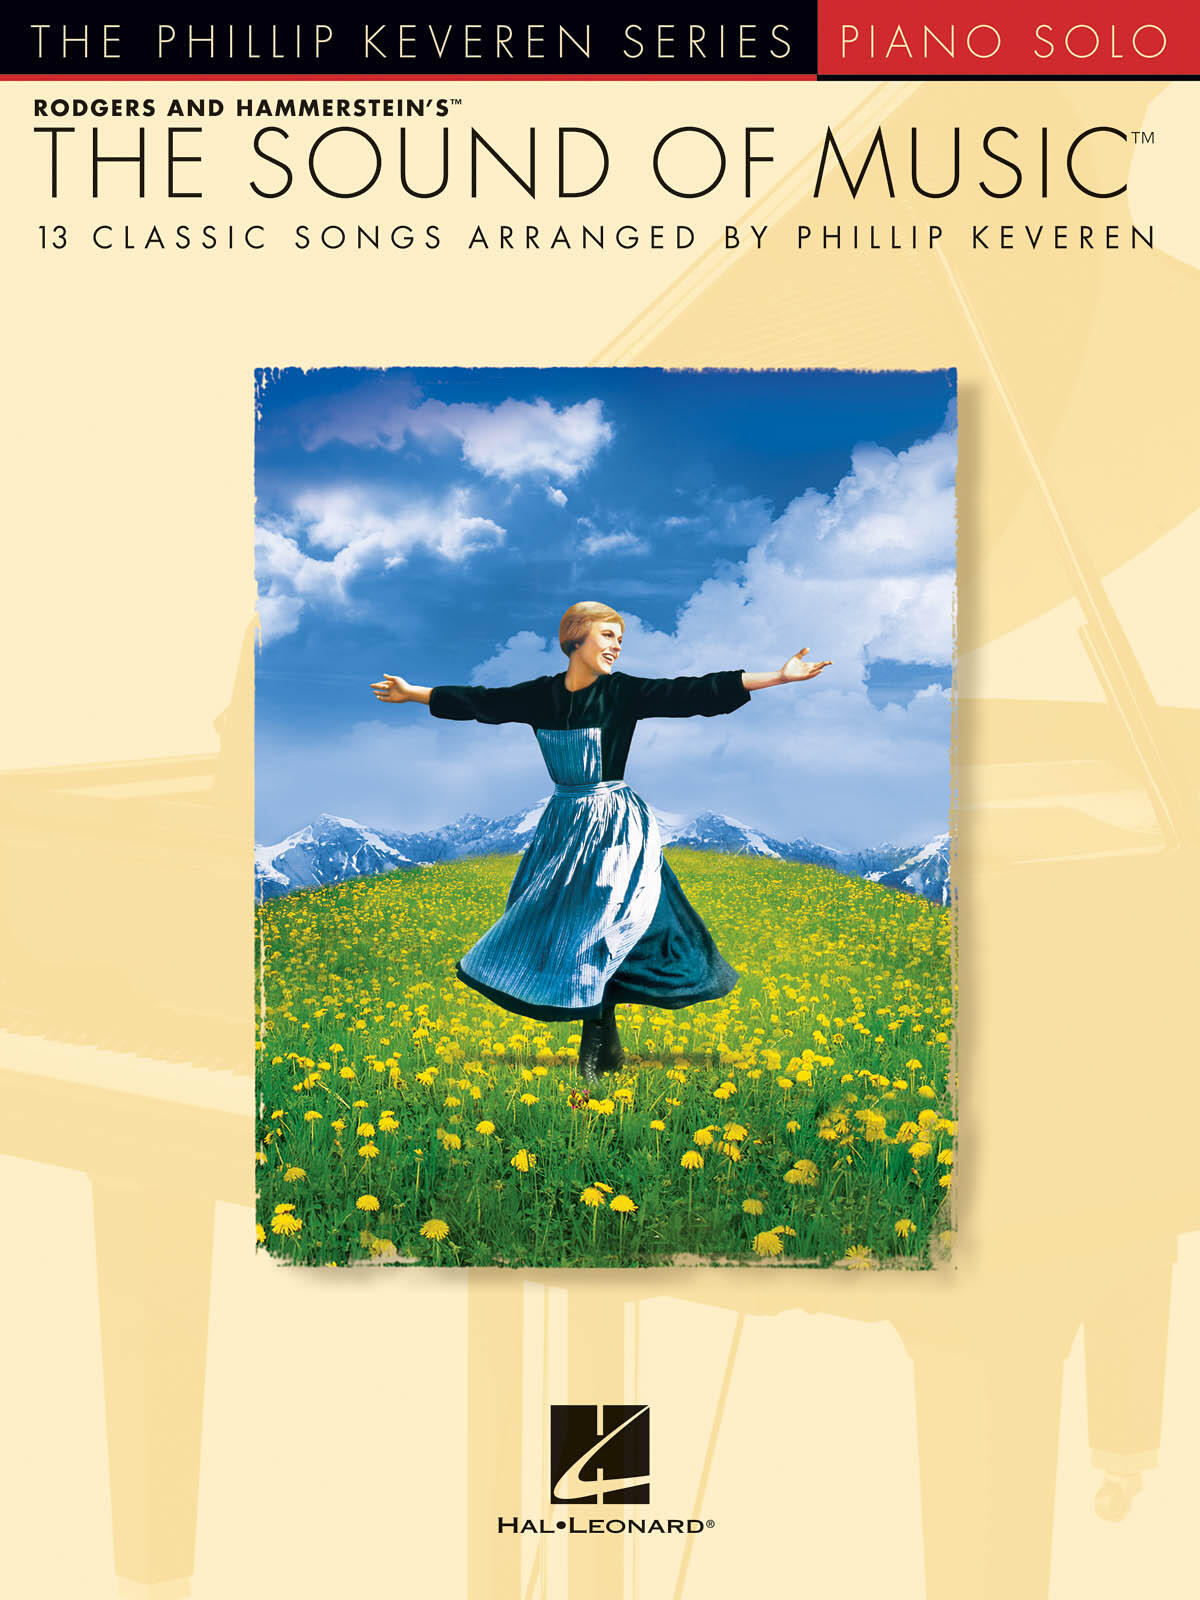 The Sound of Music - 13 Classic Songs The Phillip Keveren Series : photo 1